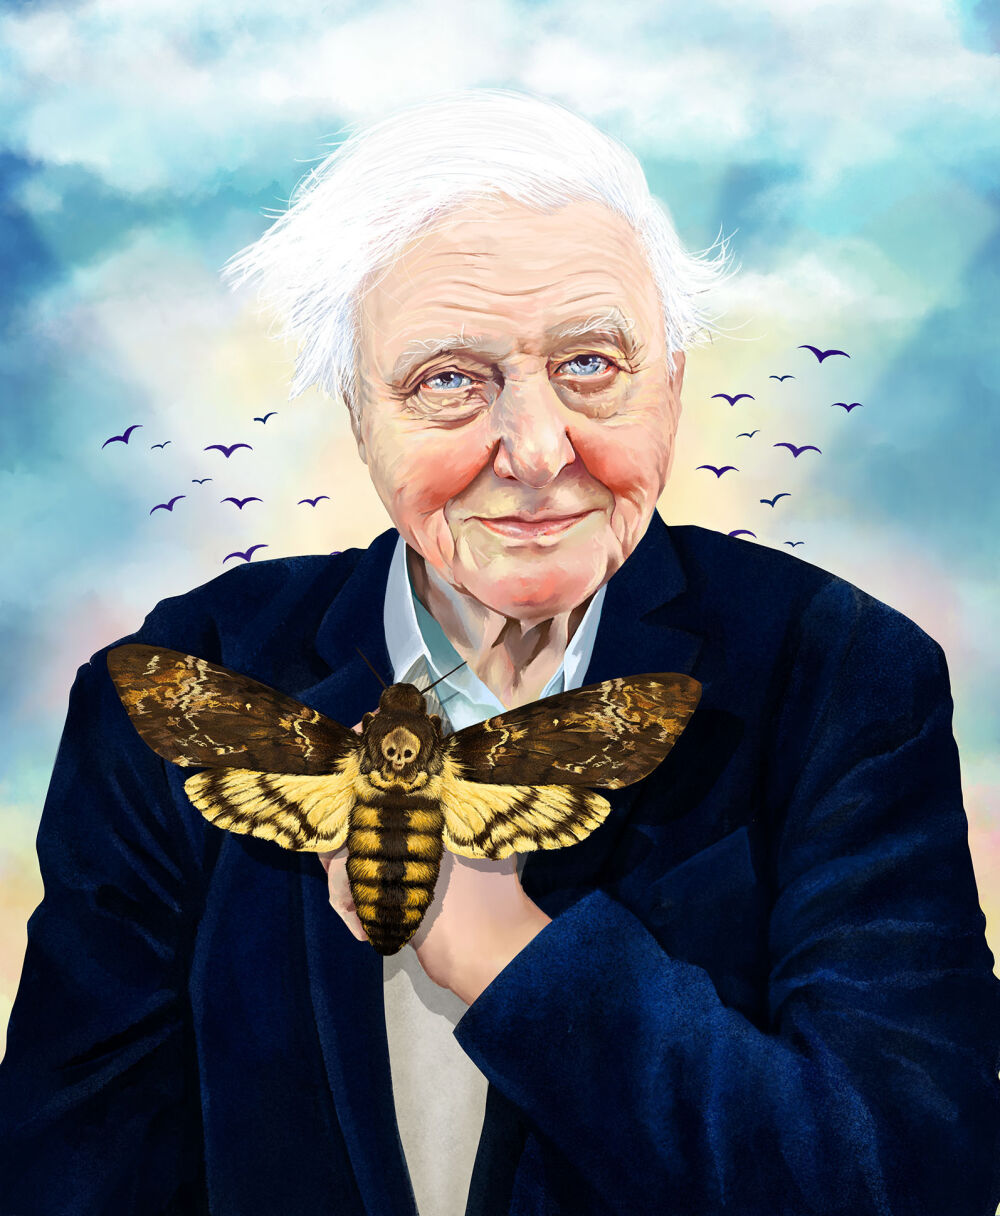 Illustrated portrait of David Attenborough by Eplet